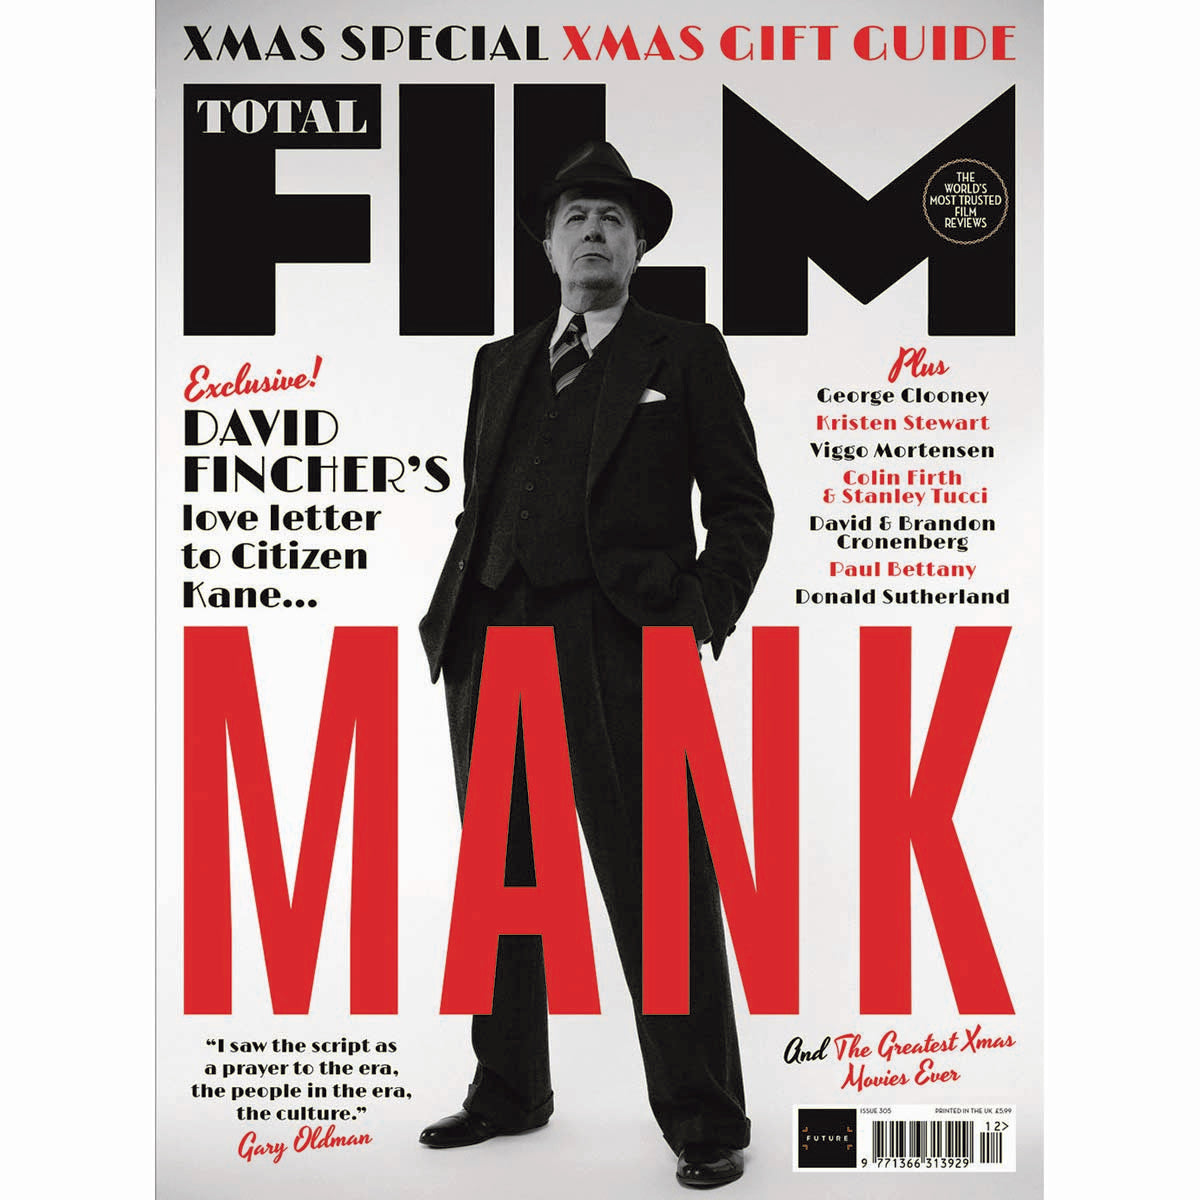 Total Film Issue 305 (December 2020) Mank